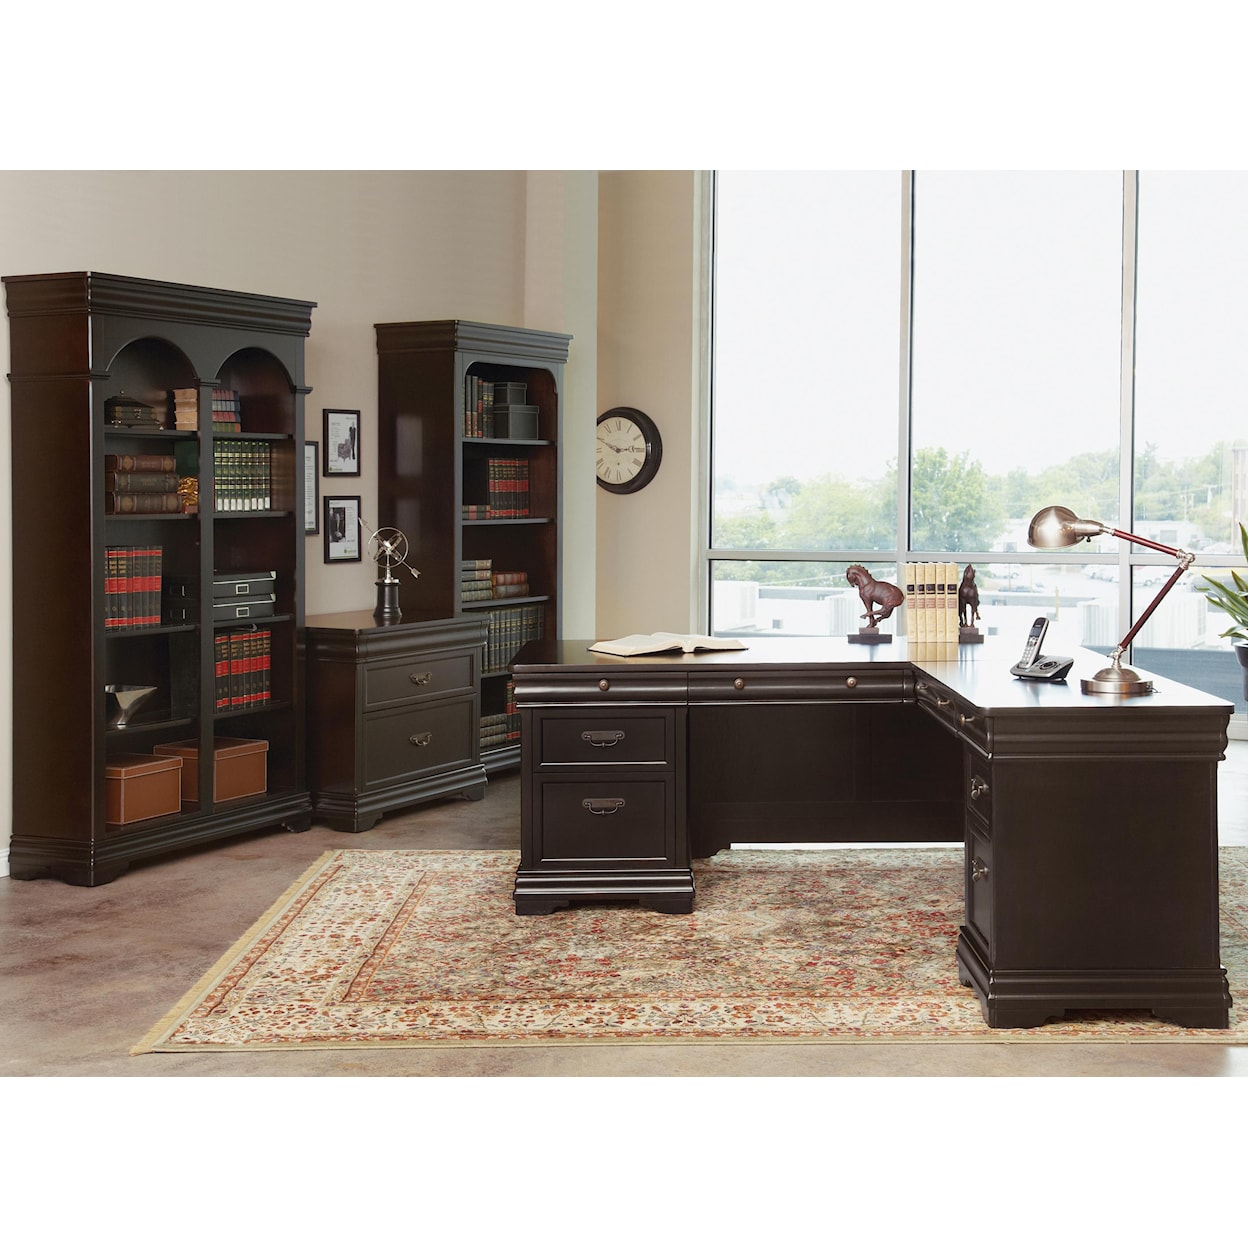 Martin Home Furnishings Beaumont Double Open Bookcase 